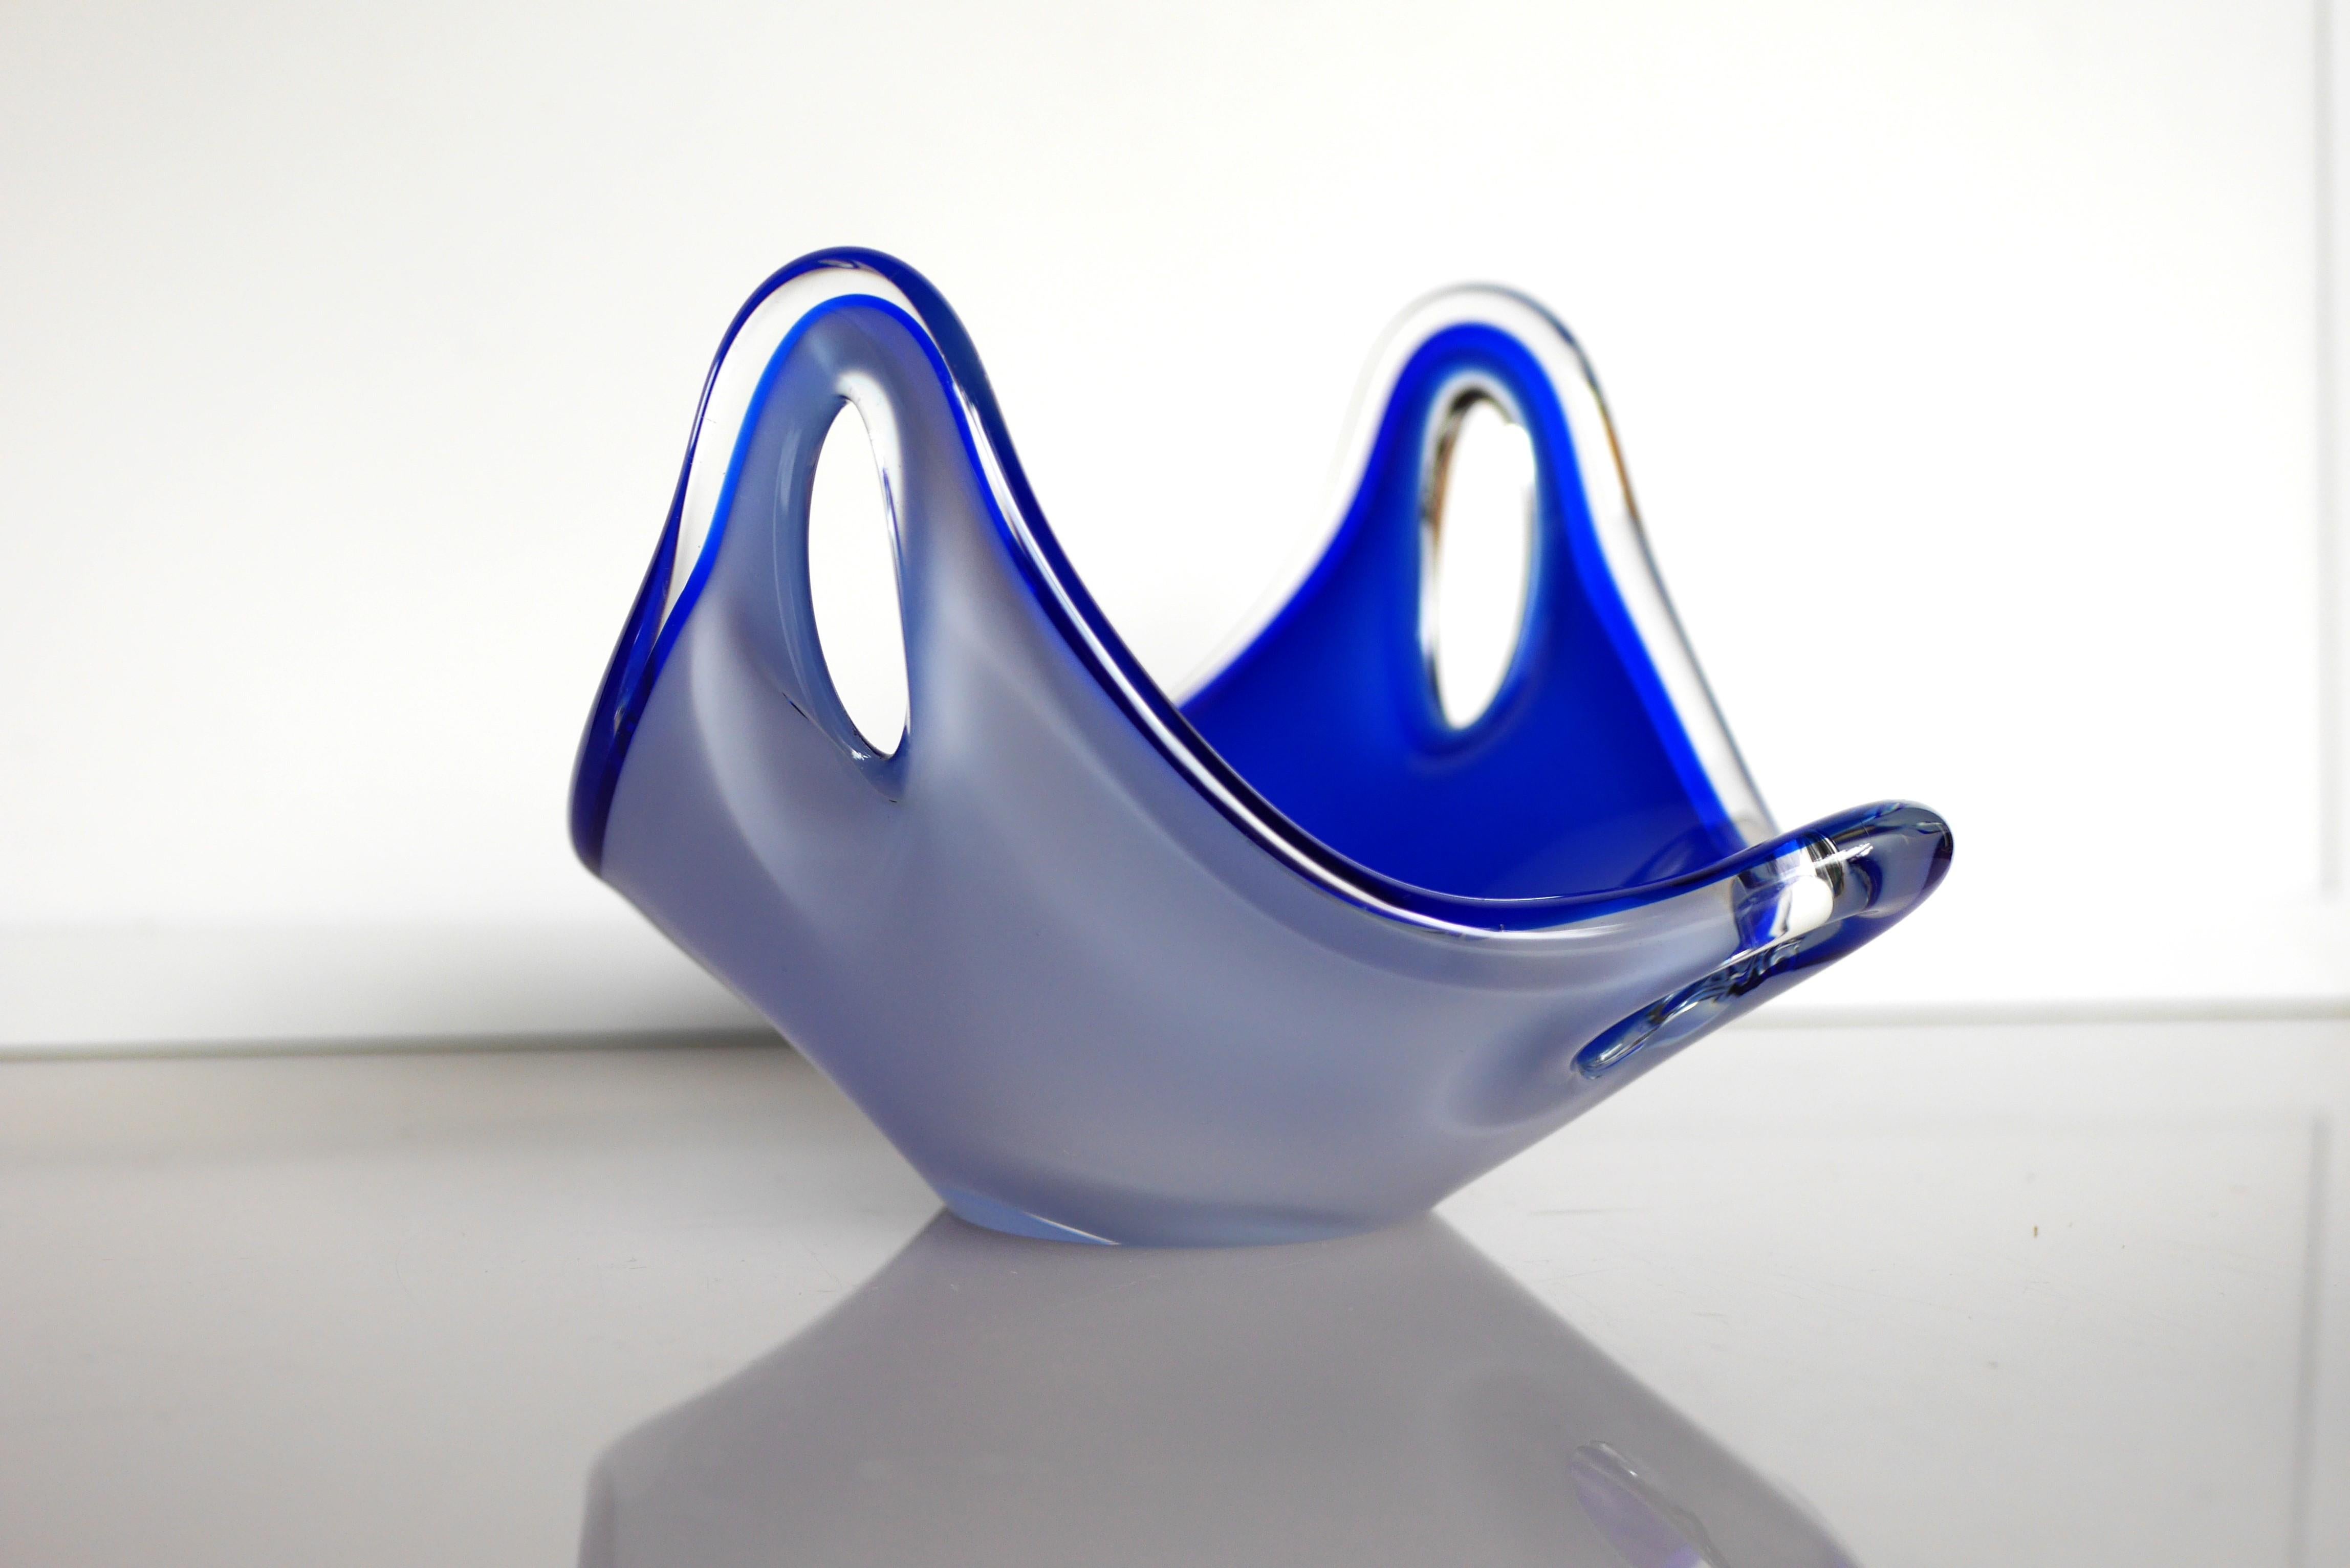 An incredible hand-blown vintage glass bowl, made and signed by the talented Paul Kedelv for Flygsfors, Sweden. The piece is very biomorphic, with arches with loops in them, and has an amazing almost iridescent blue color and on the outside it is